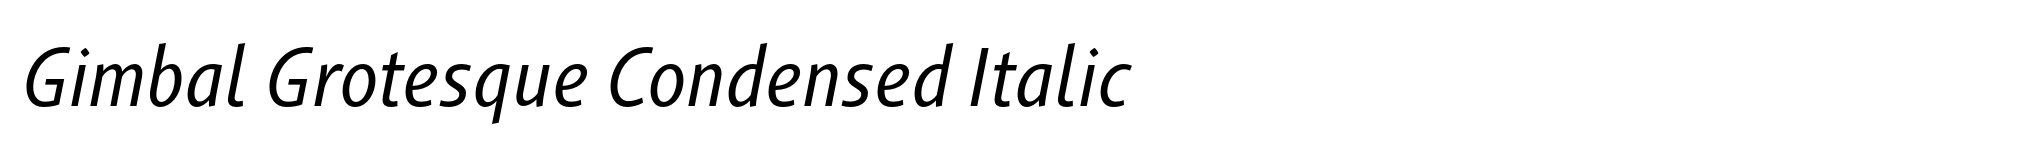 Gimbal Grotesque Condensed Italic image